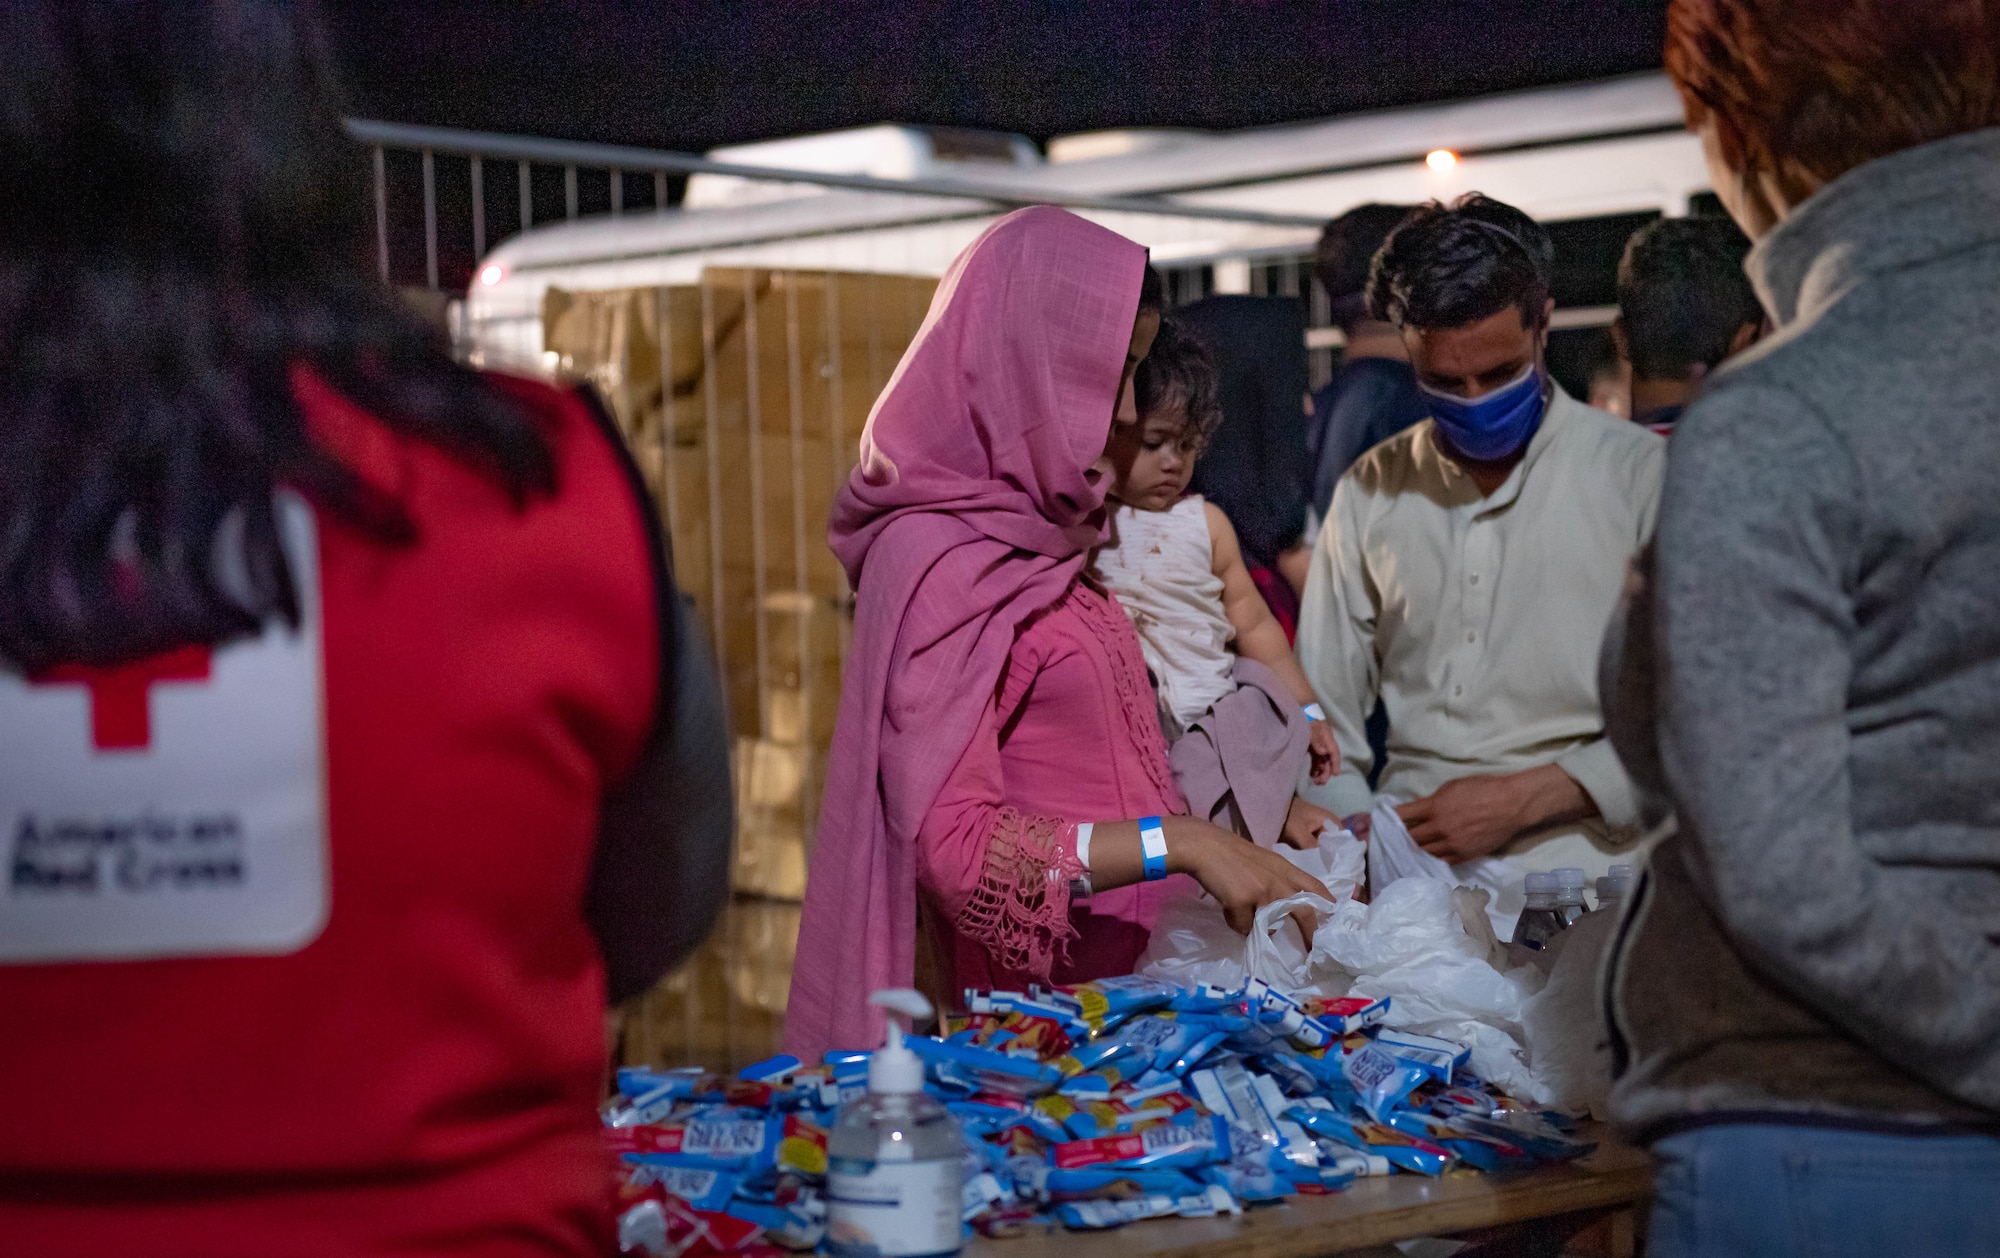 Members of the American Red Cross issue food and water to Afghan evacuees during Operation Allies Refuge, Aug. 20, 2021. Ramstein Air Base is providing safe, temporary lodging for evacuees from Afghanistan as part of the operation. The operation is facilitating the quick, safe evacuation of U.S. citizens, Special Immigrant Visa applicants and other at-risk Afghans from Afghanistan. Evacuees will receive support, such as temporary lodging, food and water and access to medical care as well as religious care at Ramstein AB while preparing for onward movements to their final destination.